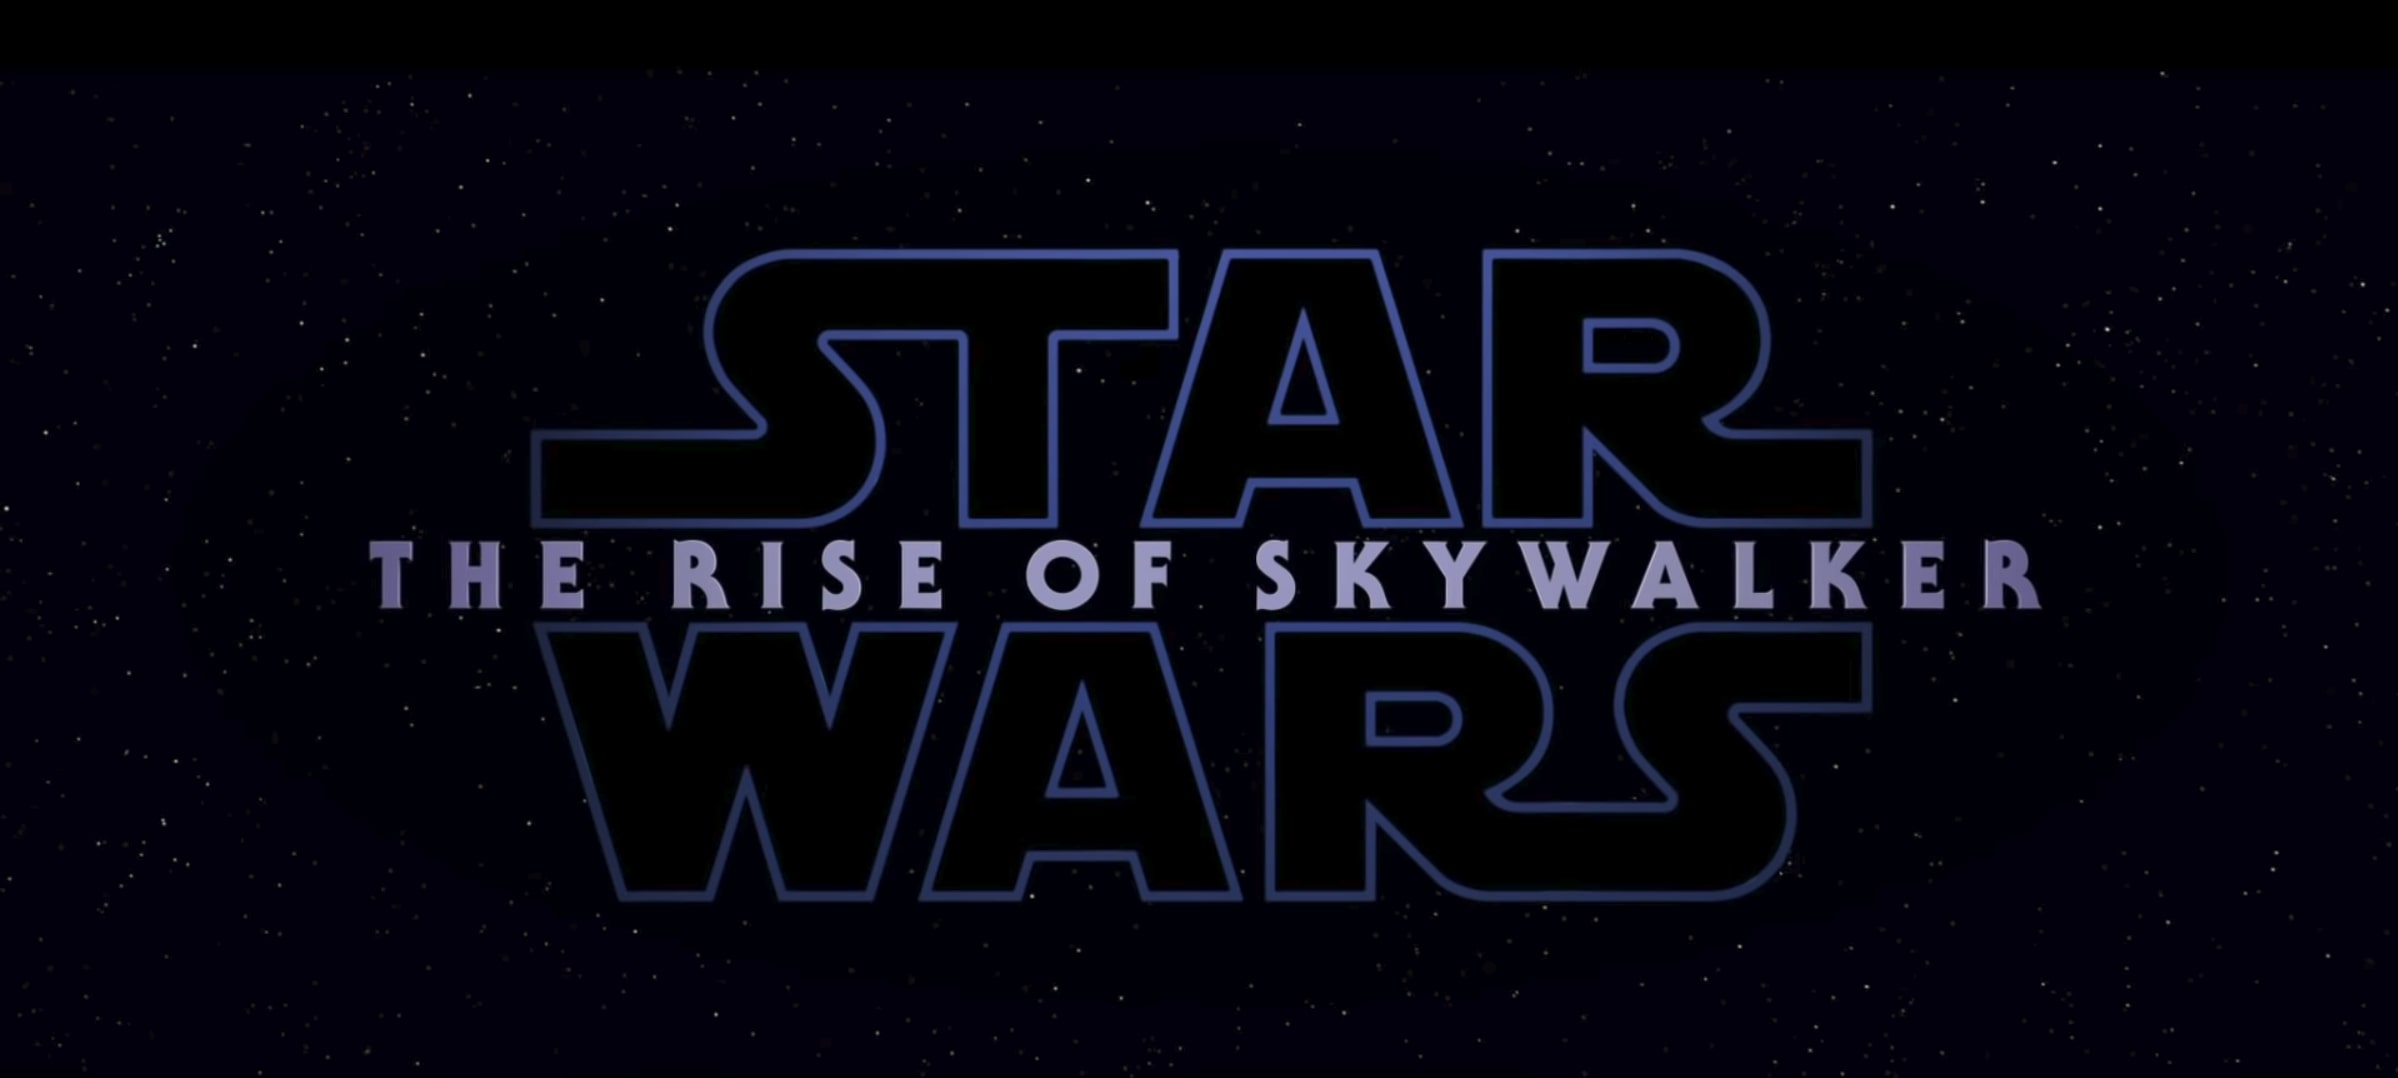 Star Wars The Rise Of Skywalker Tickets On Sale Date And Runtime